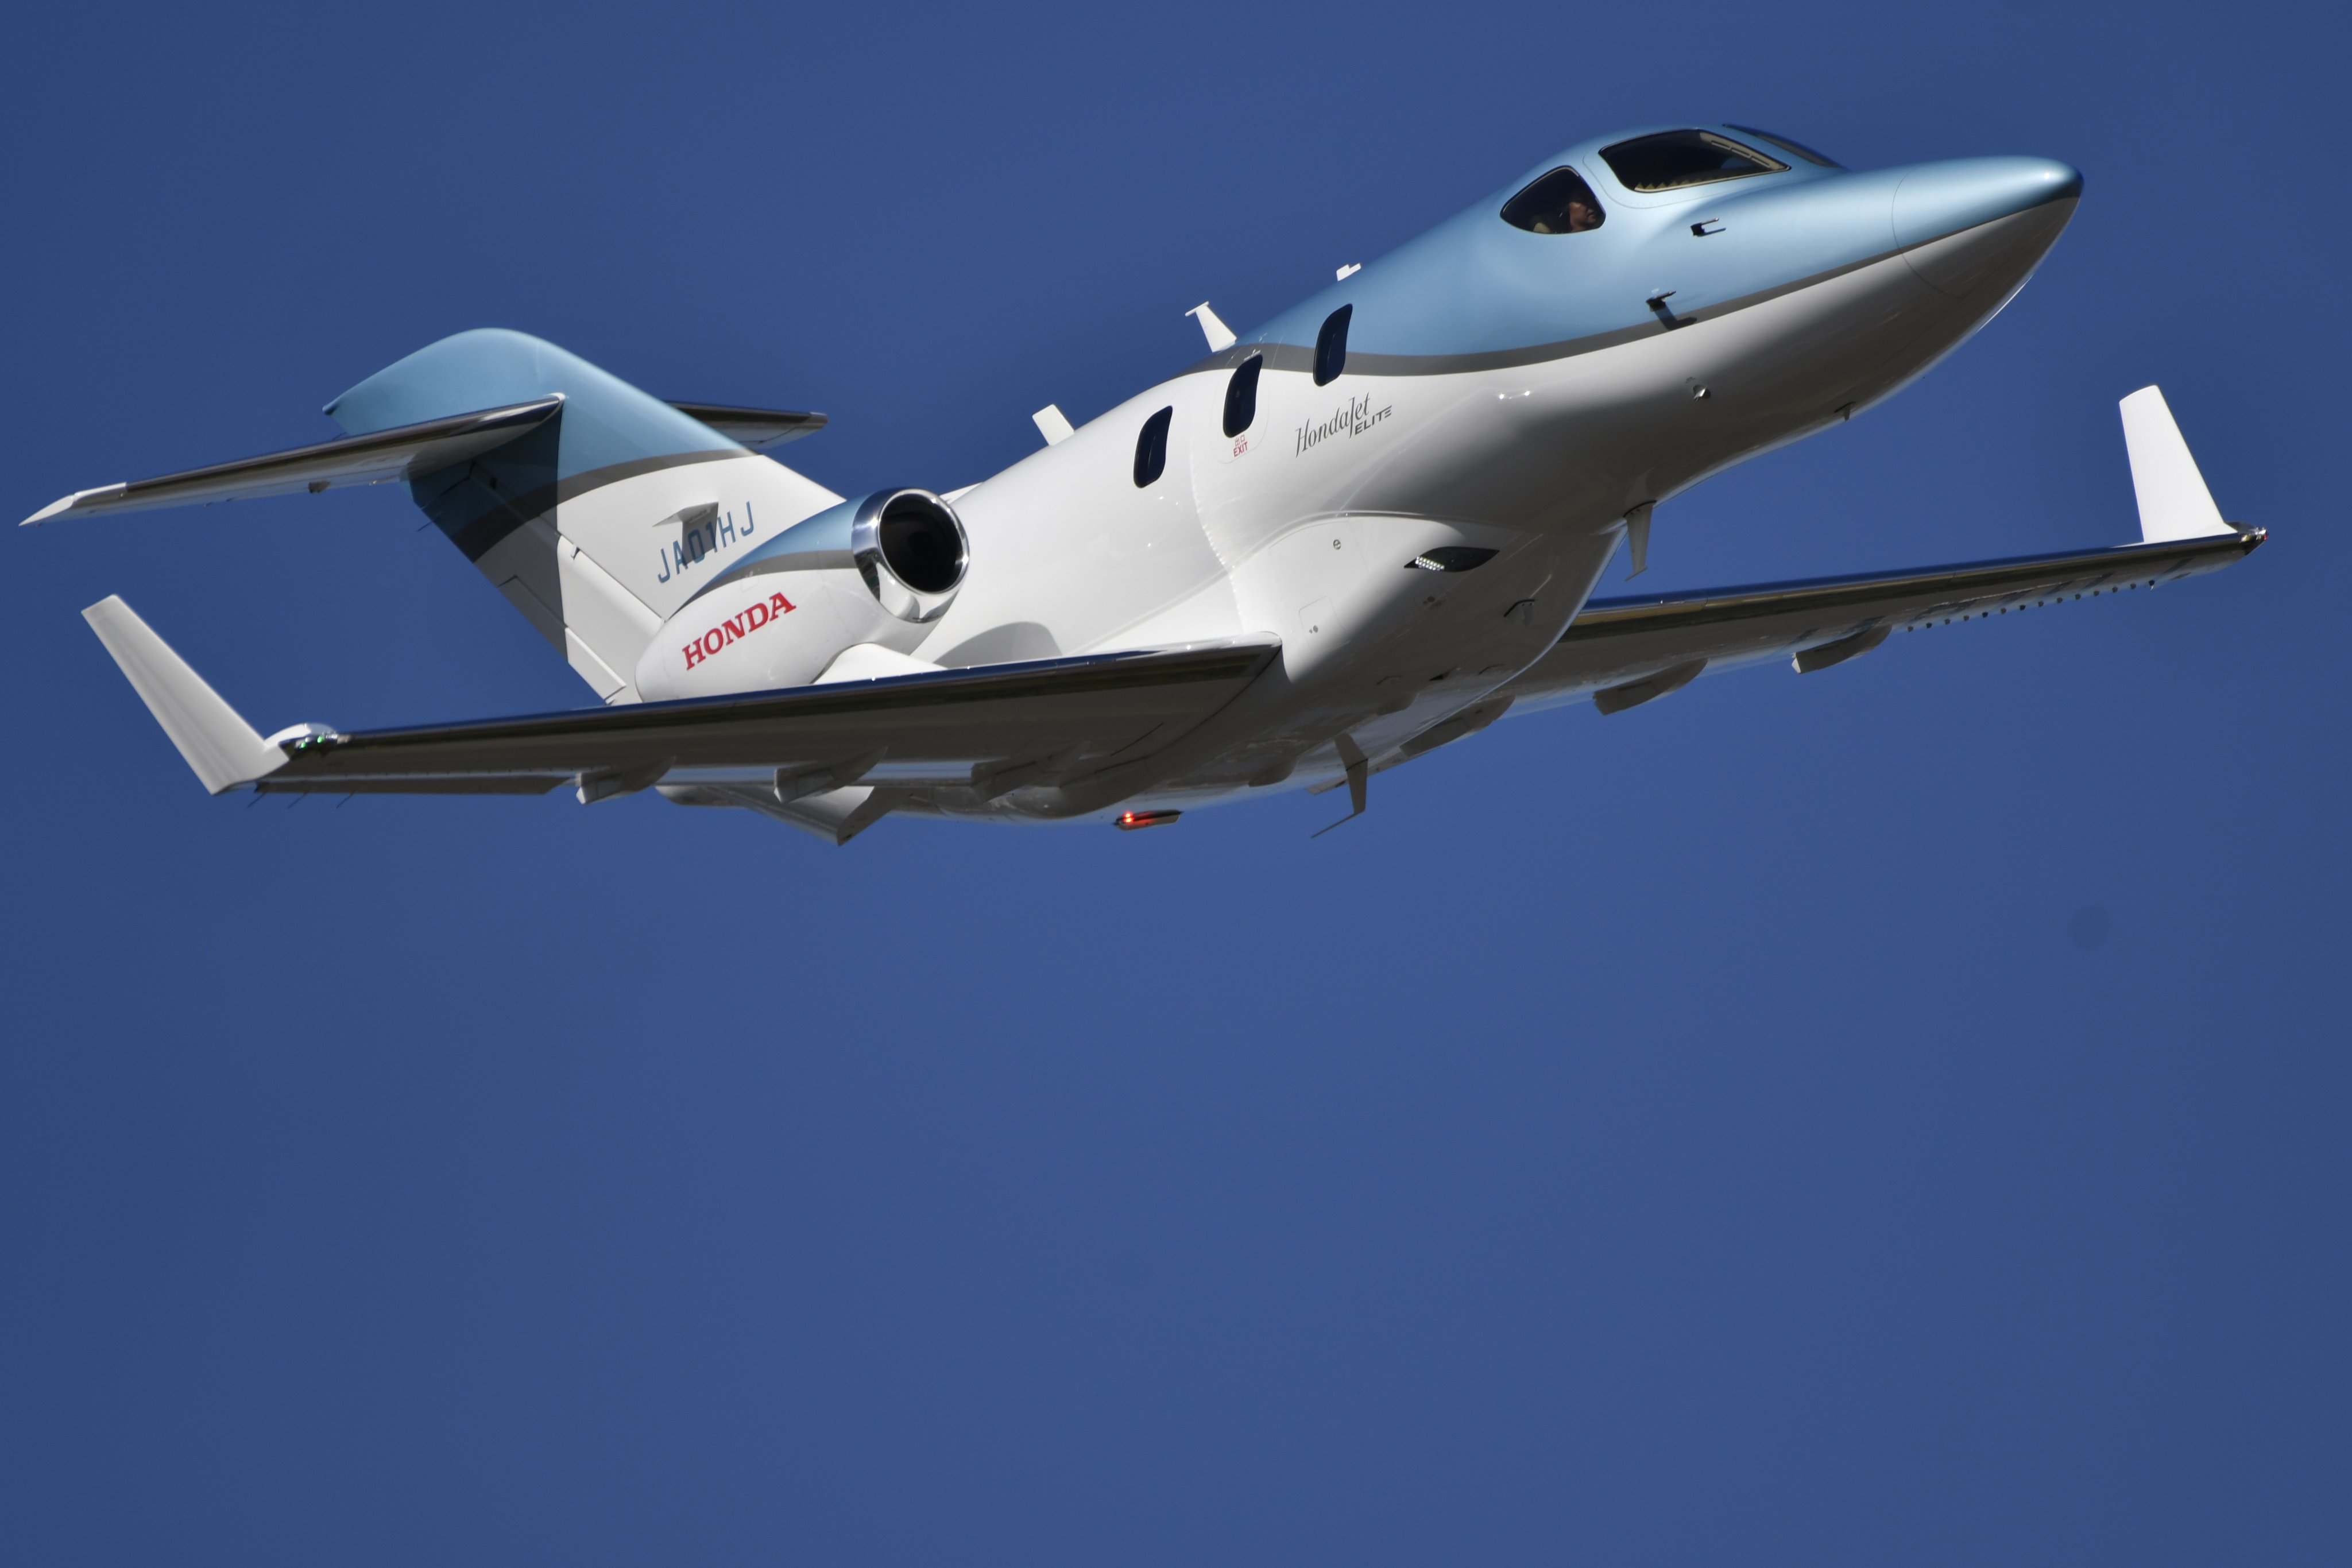 HondaJet Elite Performance  upgrade  will  allow  customers  to  fly  up to  120 nautical miles  further !